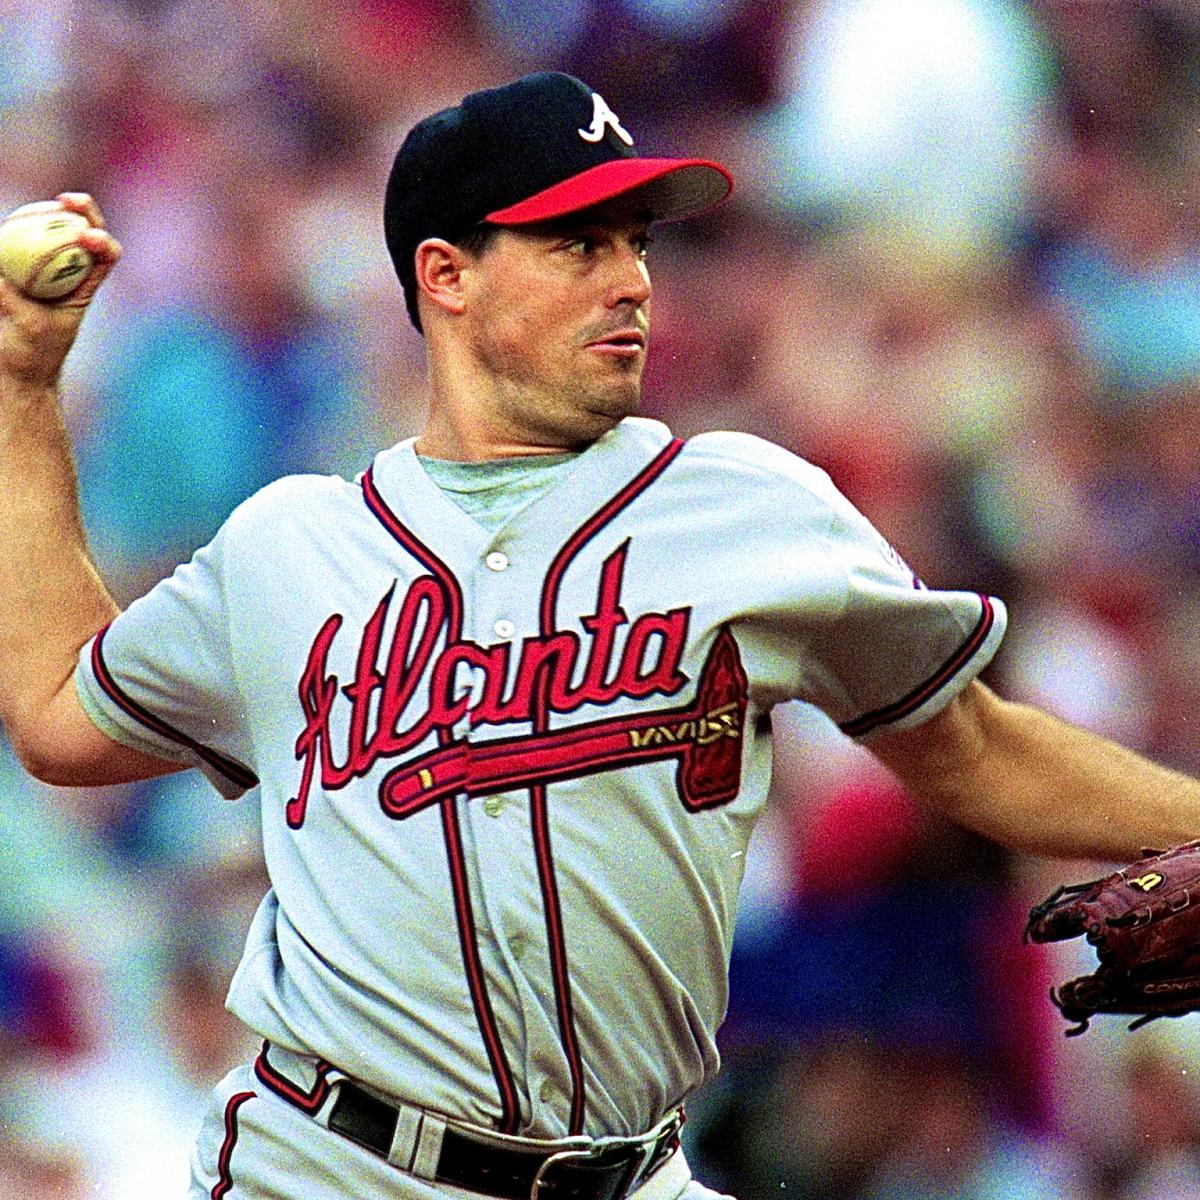 Greg Maddux Proved His Scouting Report from 1985 Wrong | Bleacher Report